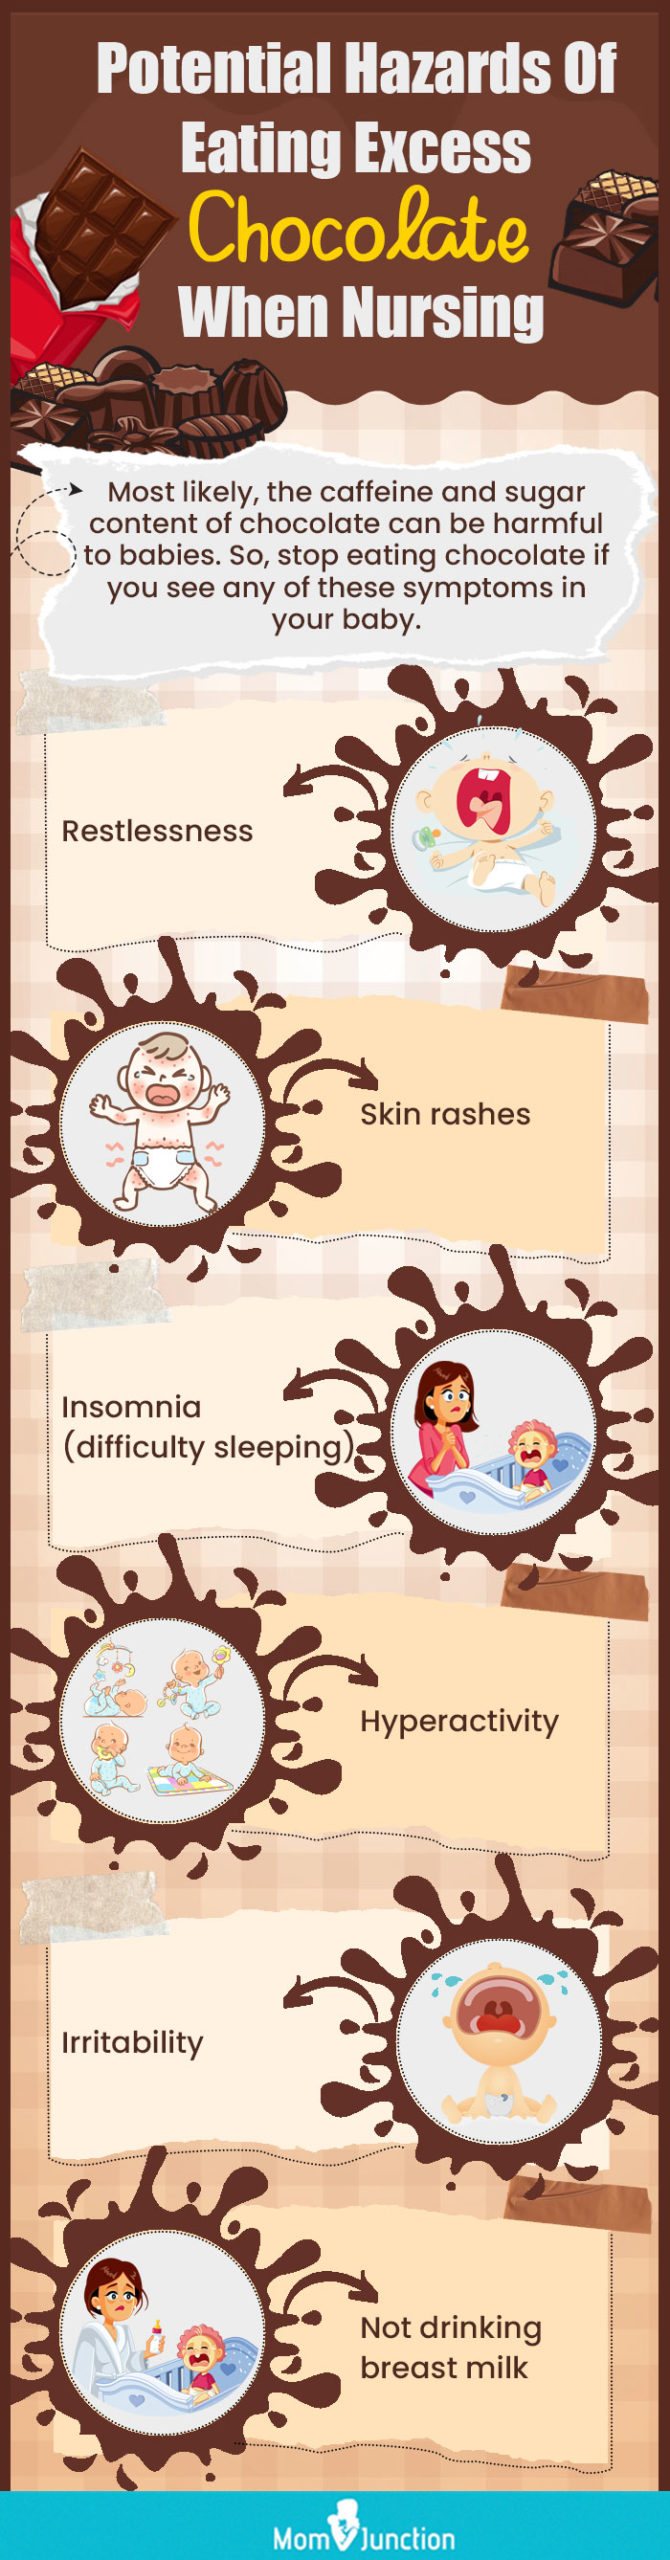 potential hazards of eating excess chocolate when nursing [infographic]